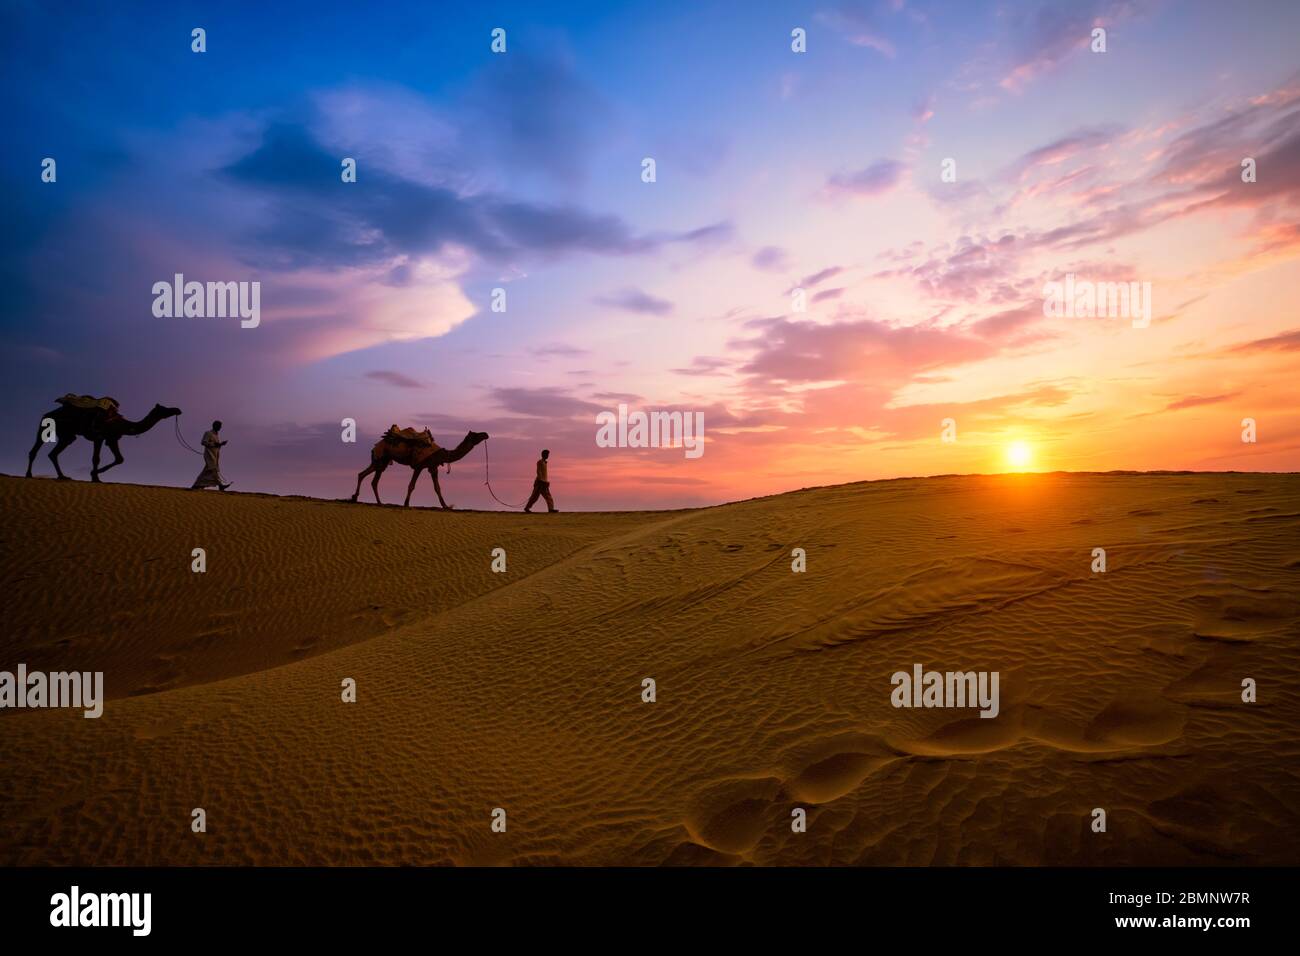 Indian cameleers camel driver with camel silhouettes in dunes on sunset. Jaisalmer, Rajasthan, India Stock Photo